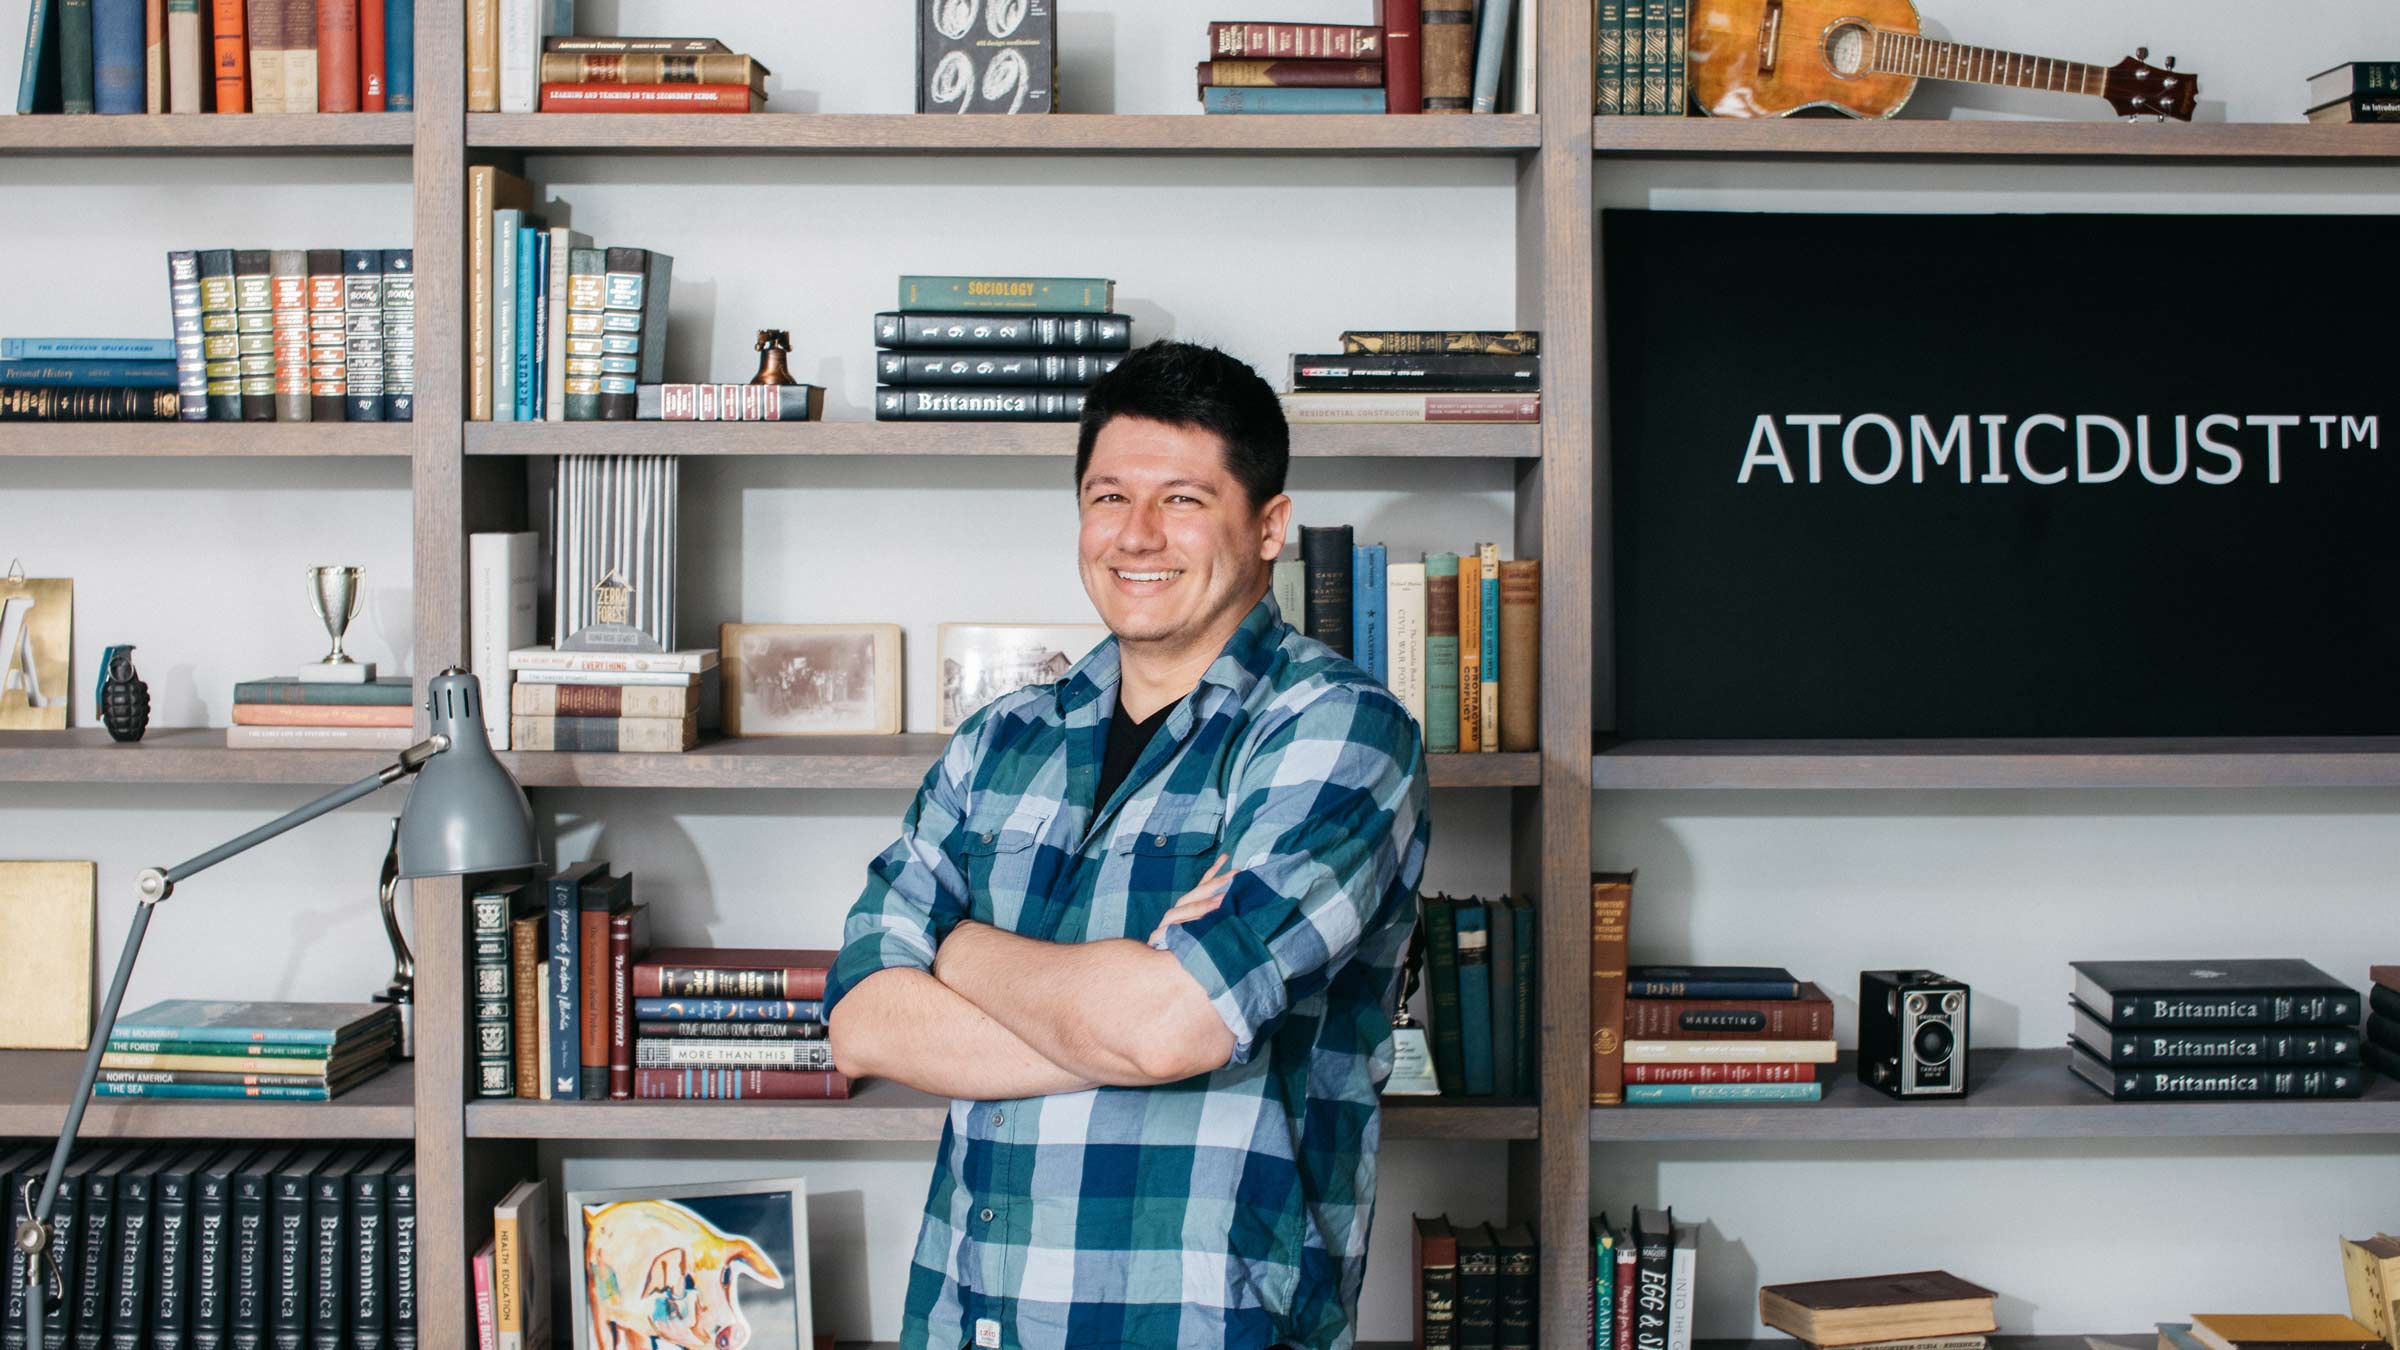 Copywriter Tanner King in the Atomicdust office